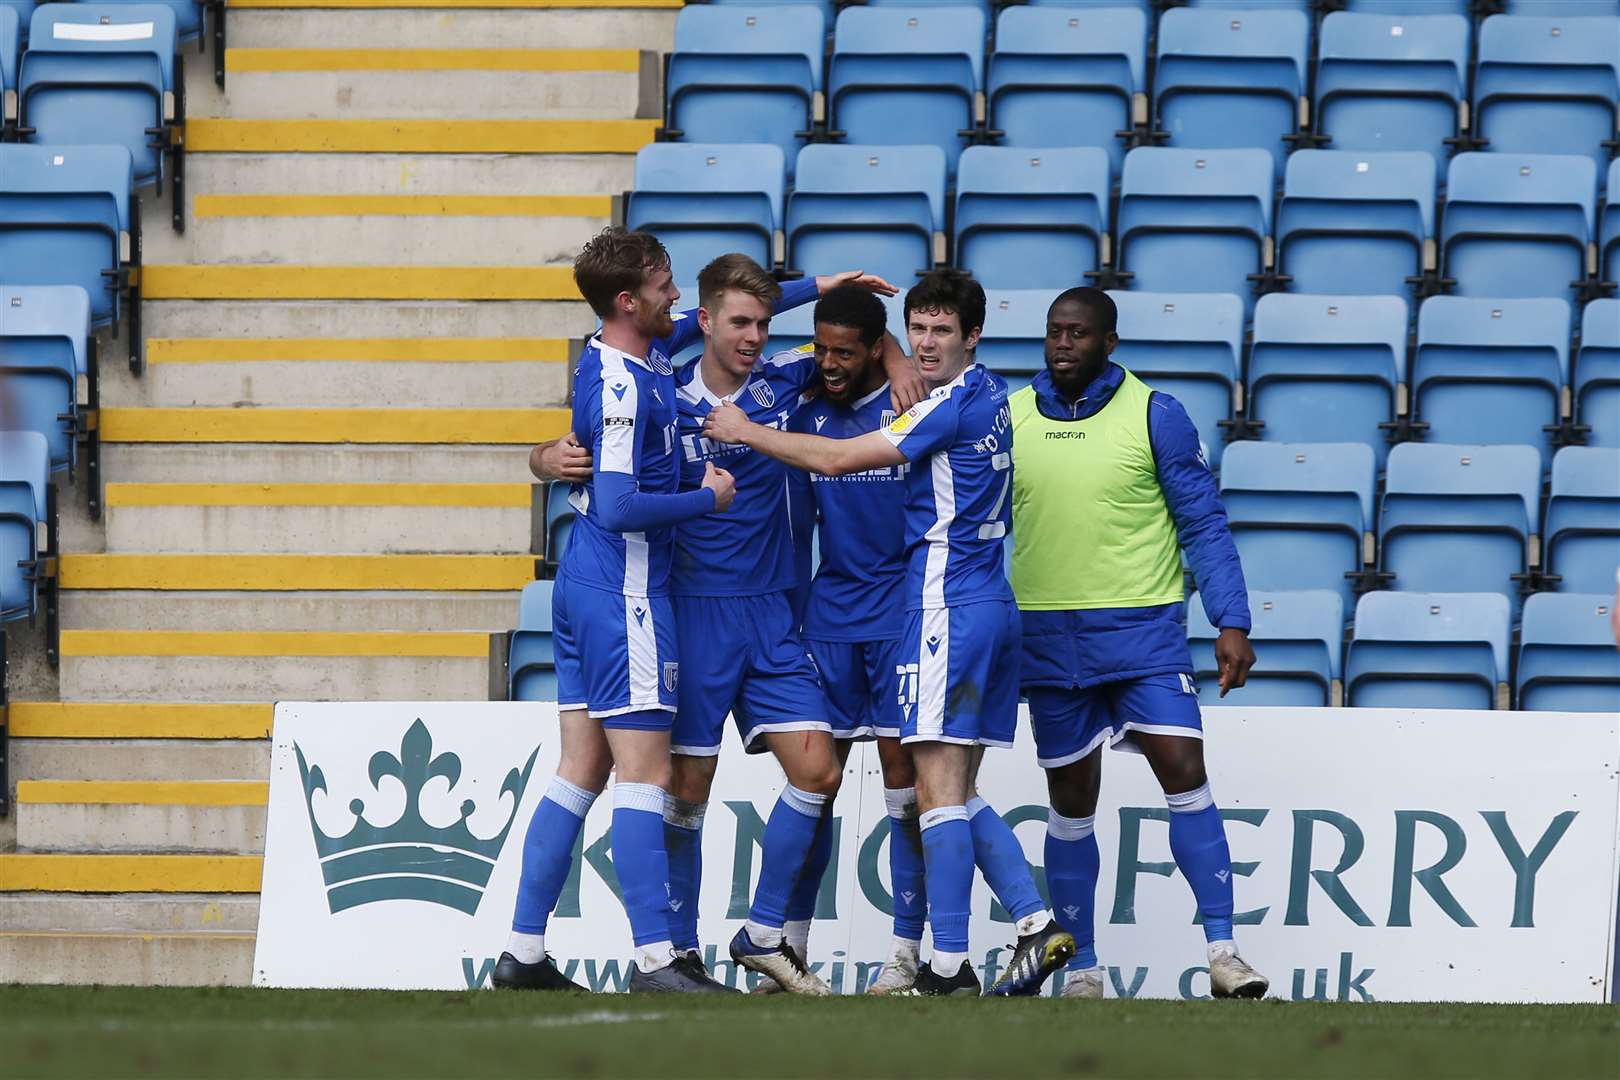 Gillingham players celebrate a goal against Ipswich Town Picture: Andy Jones